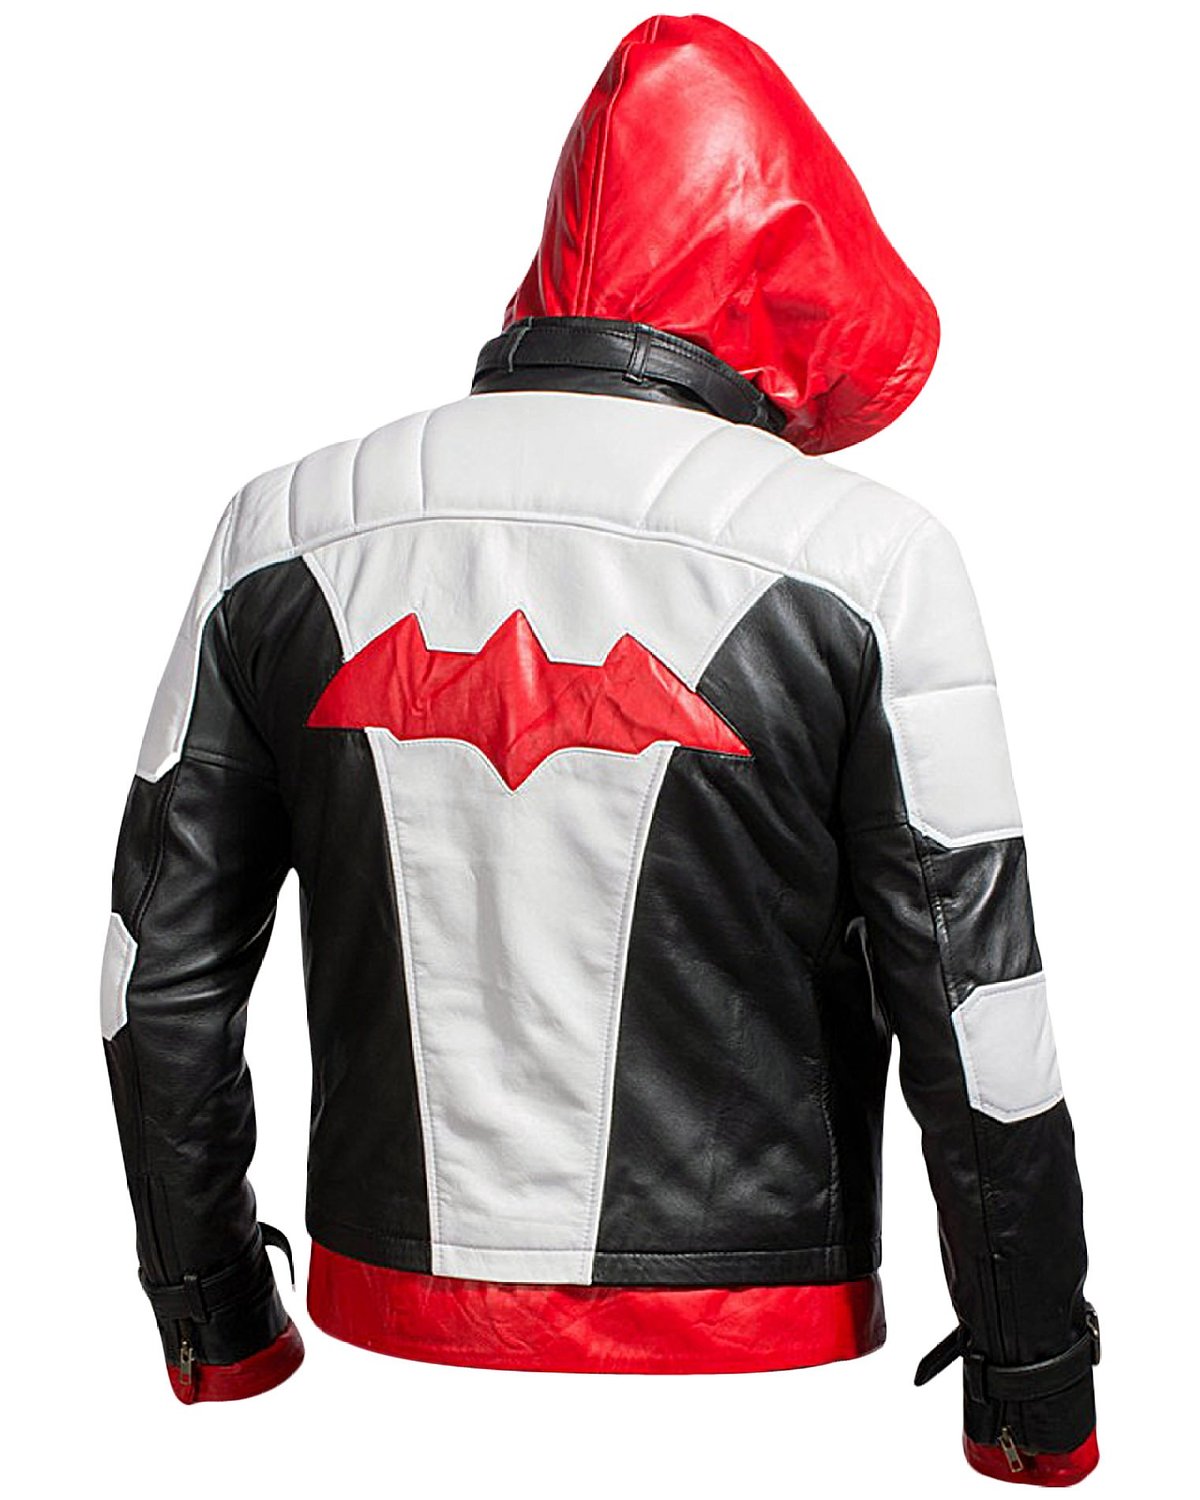 Black-White-Red - Only Jacket